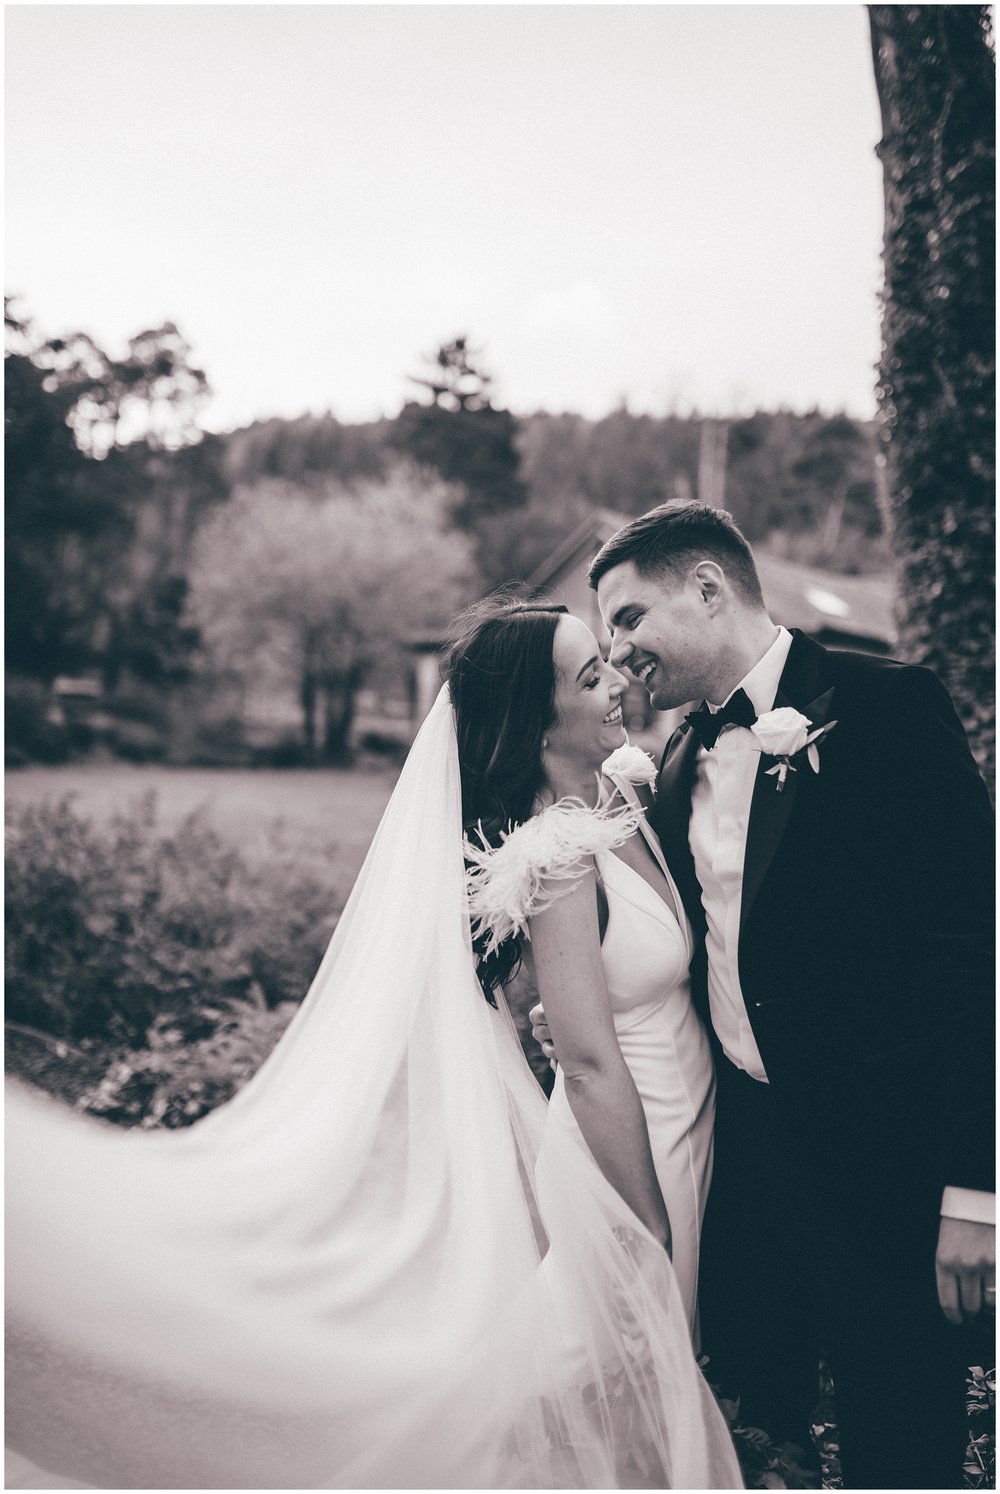 Bride and groom share a romantic moment at Tyn Dwr Hall